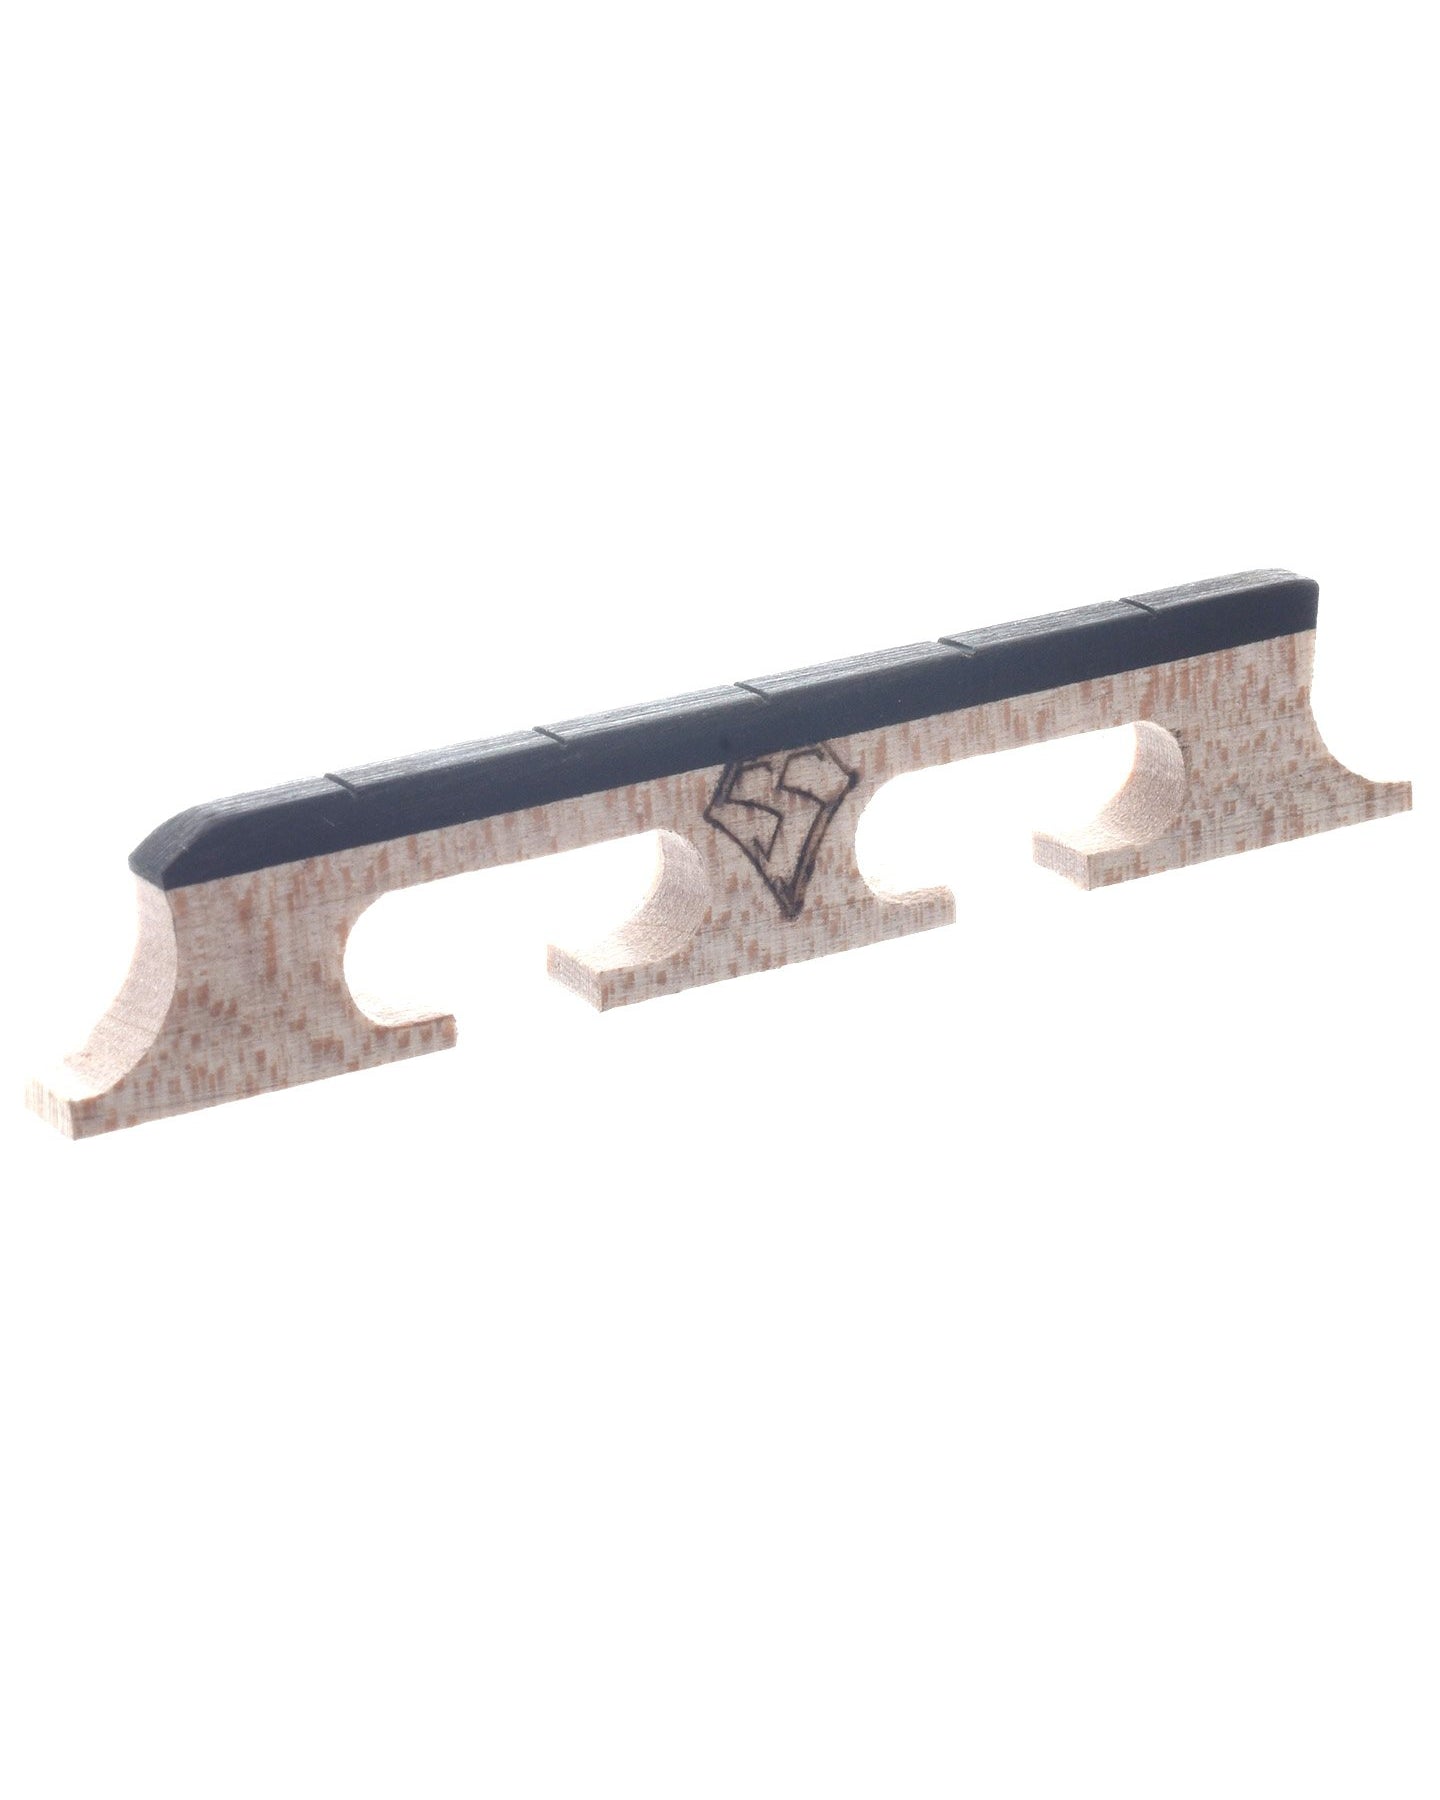 Image 1 of Snuffy Smith New Generation Banjo Bridge, 1/2" High with Crowe Spacing - SKU# SSNG-1/2-C : Product Type Accessories & Parts : Elderly Instruments